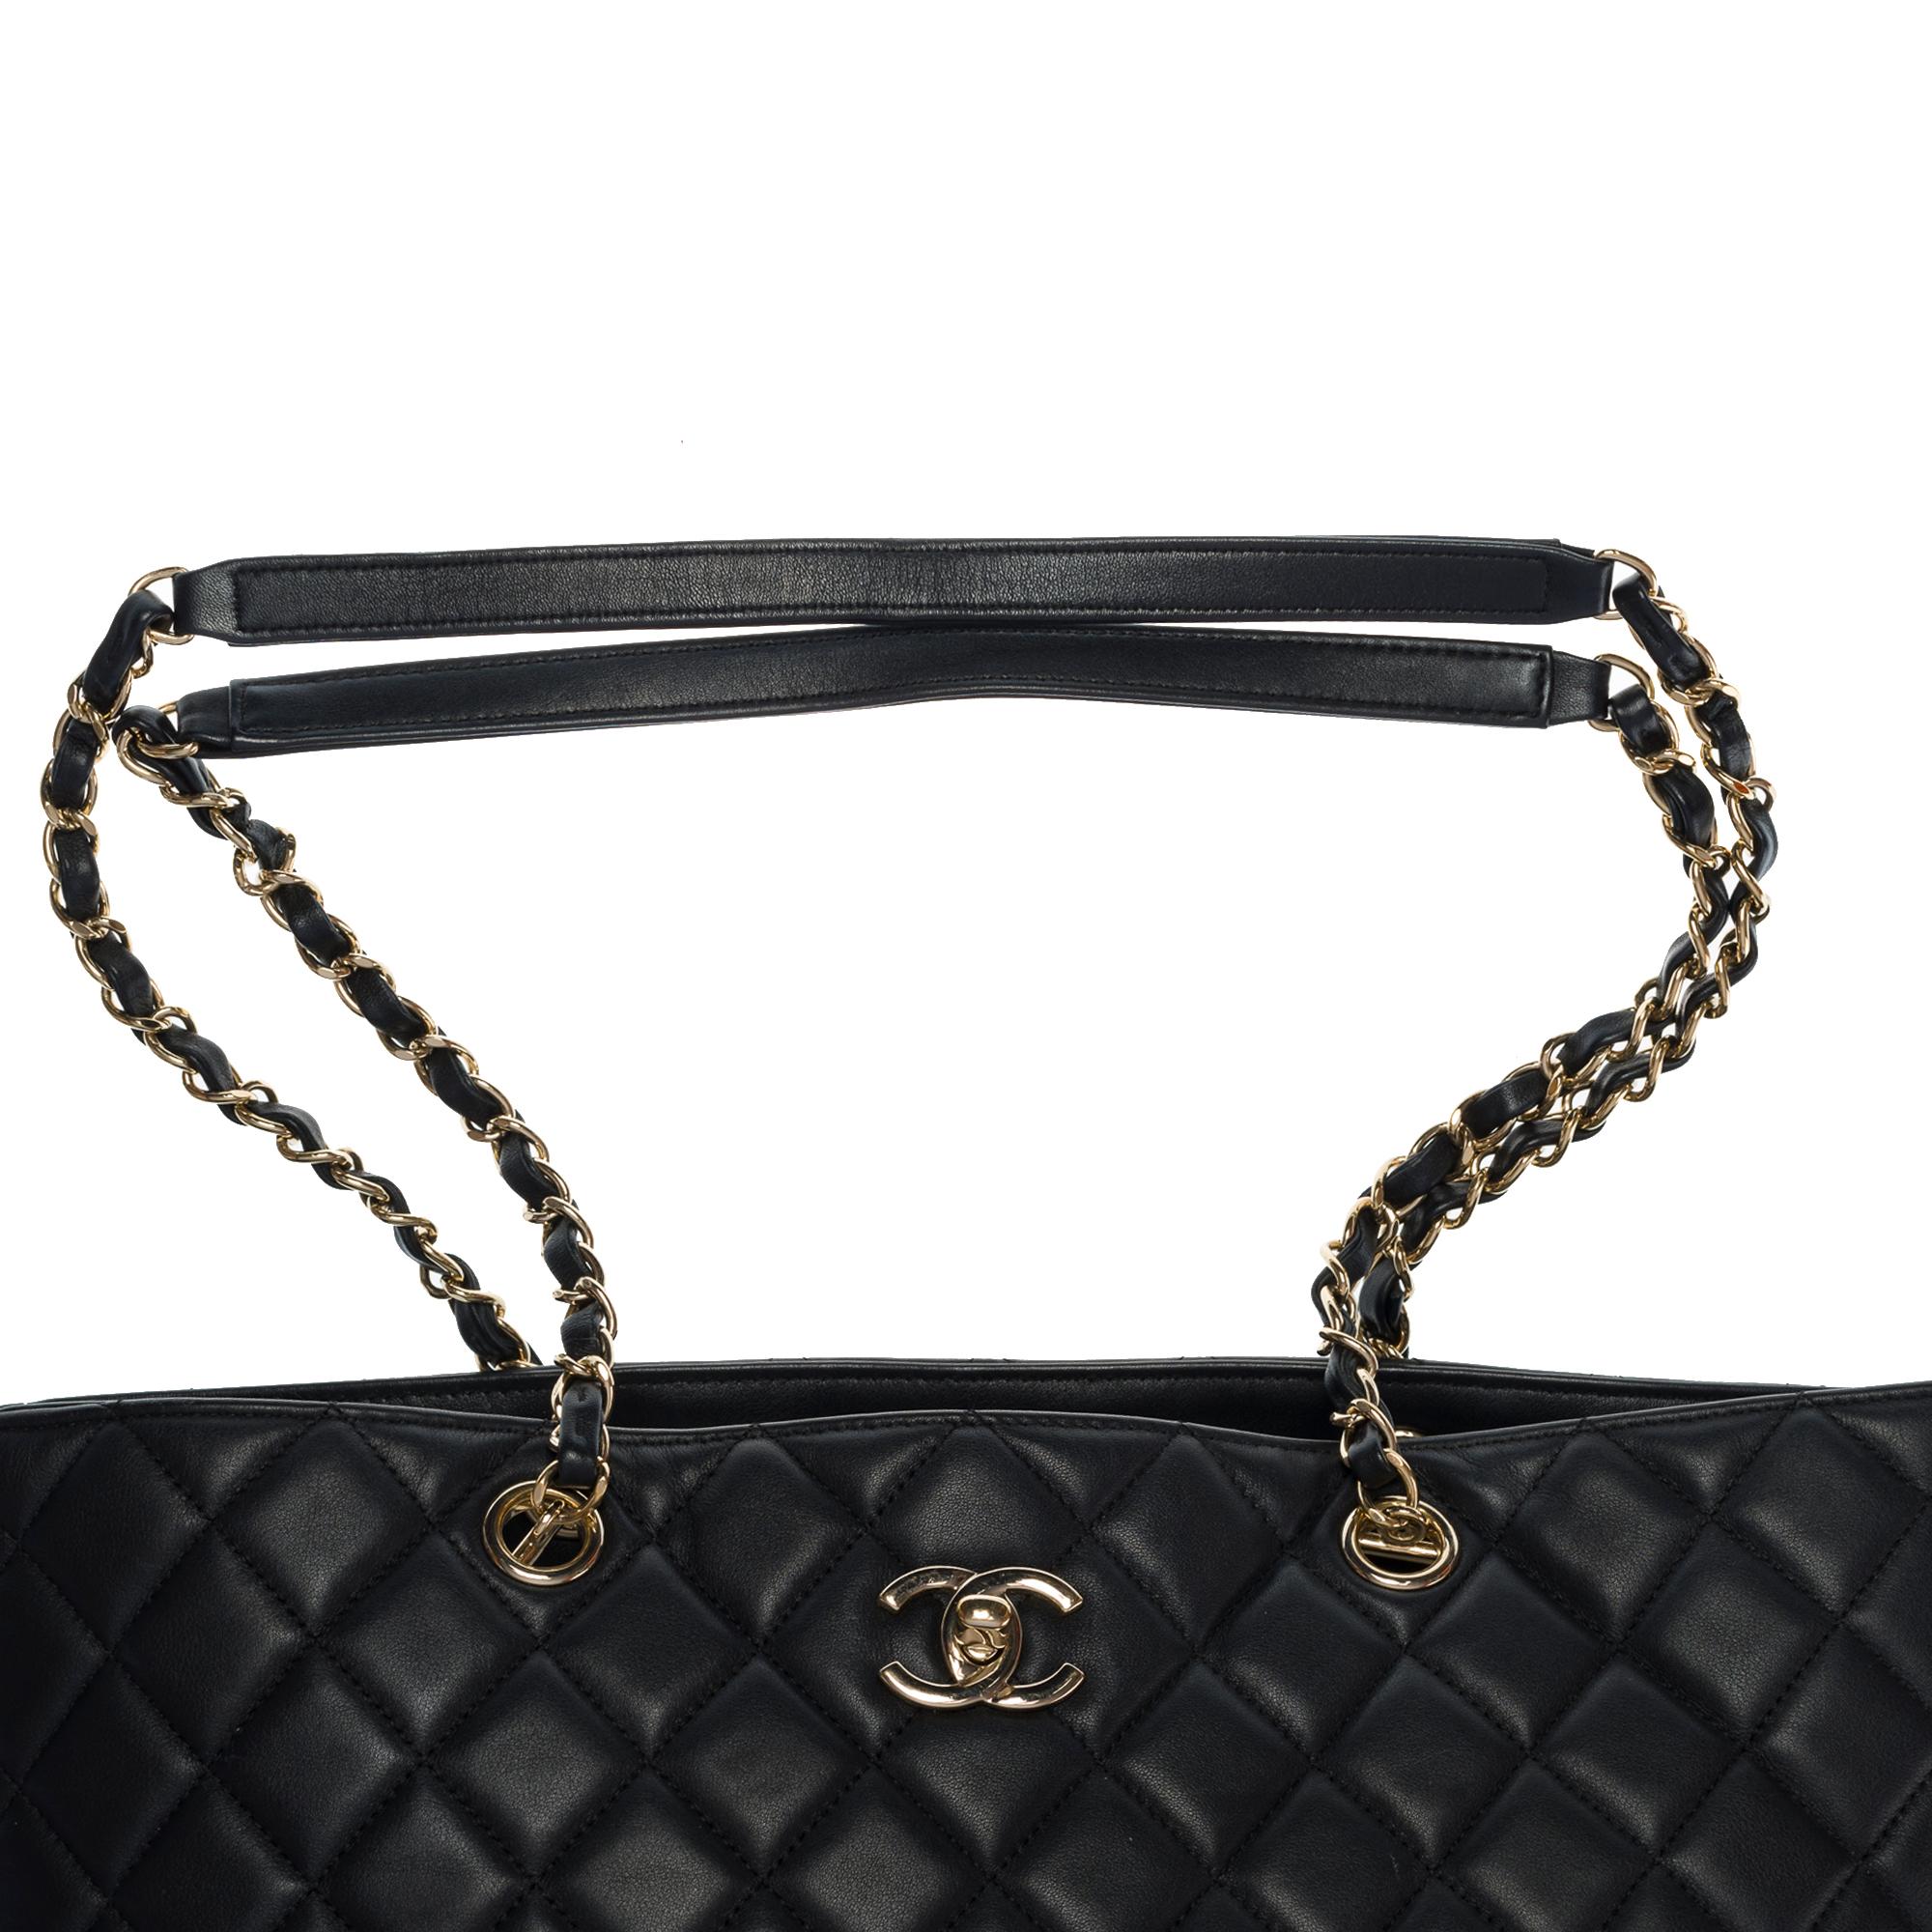 Amazing Chanel Grand Shopping Tote bag in black quilted lambskin leather, SHW 5